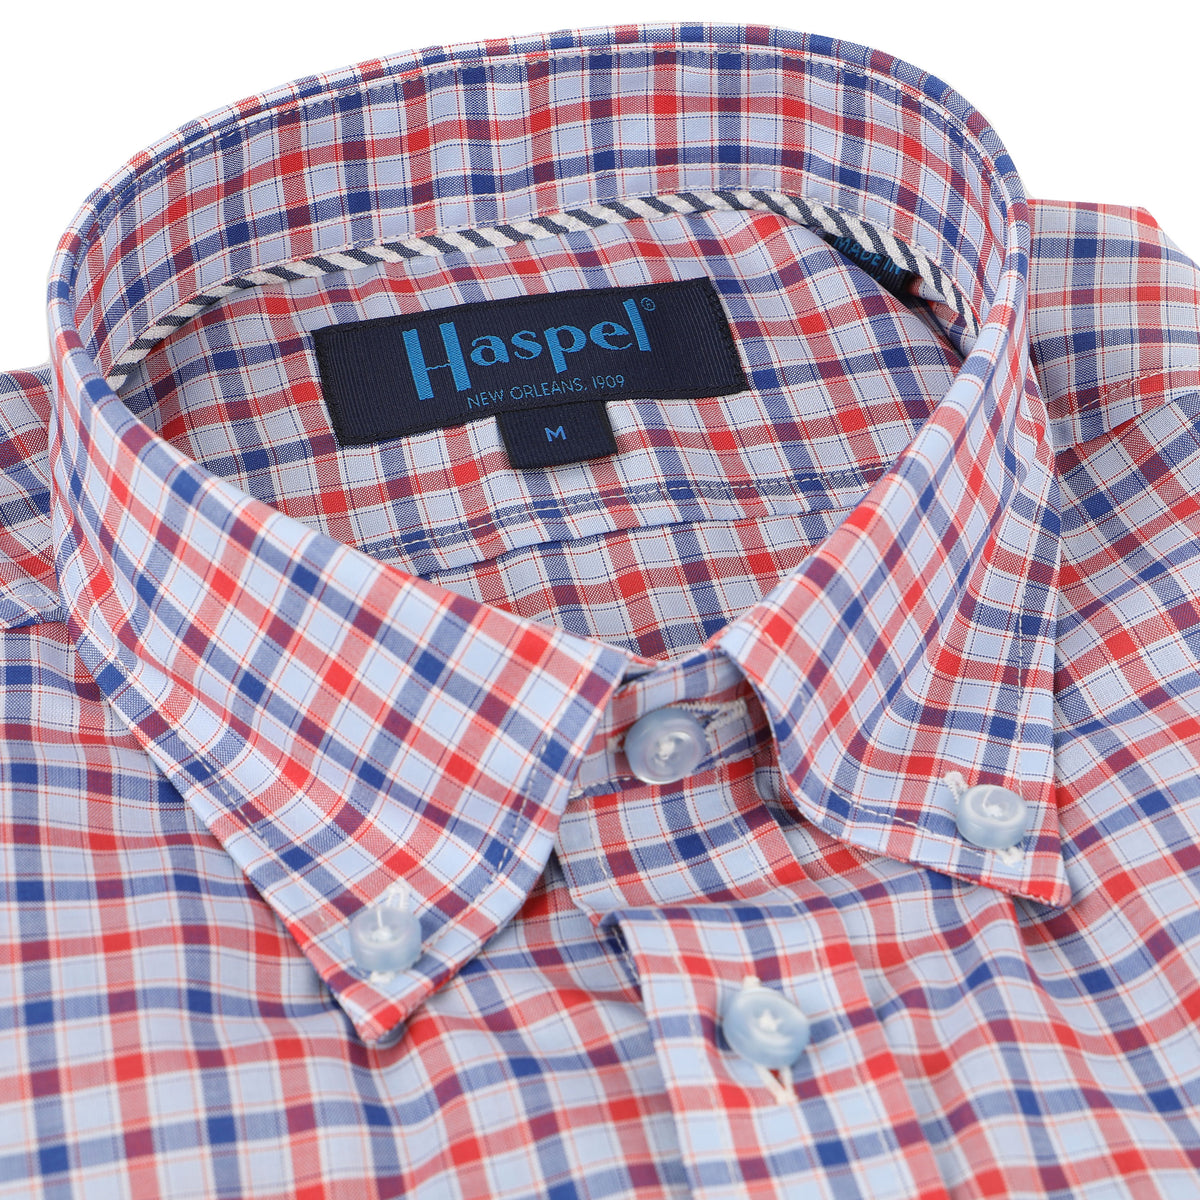 Enjoy the luxury of 100% cotton, Italian made quality, and stunning red and blue check.  100% Cotton • Button Down Collar • Long Sleeve • Contrast Buttons • Chest Pocket • Machine Washable • Made in Italy